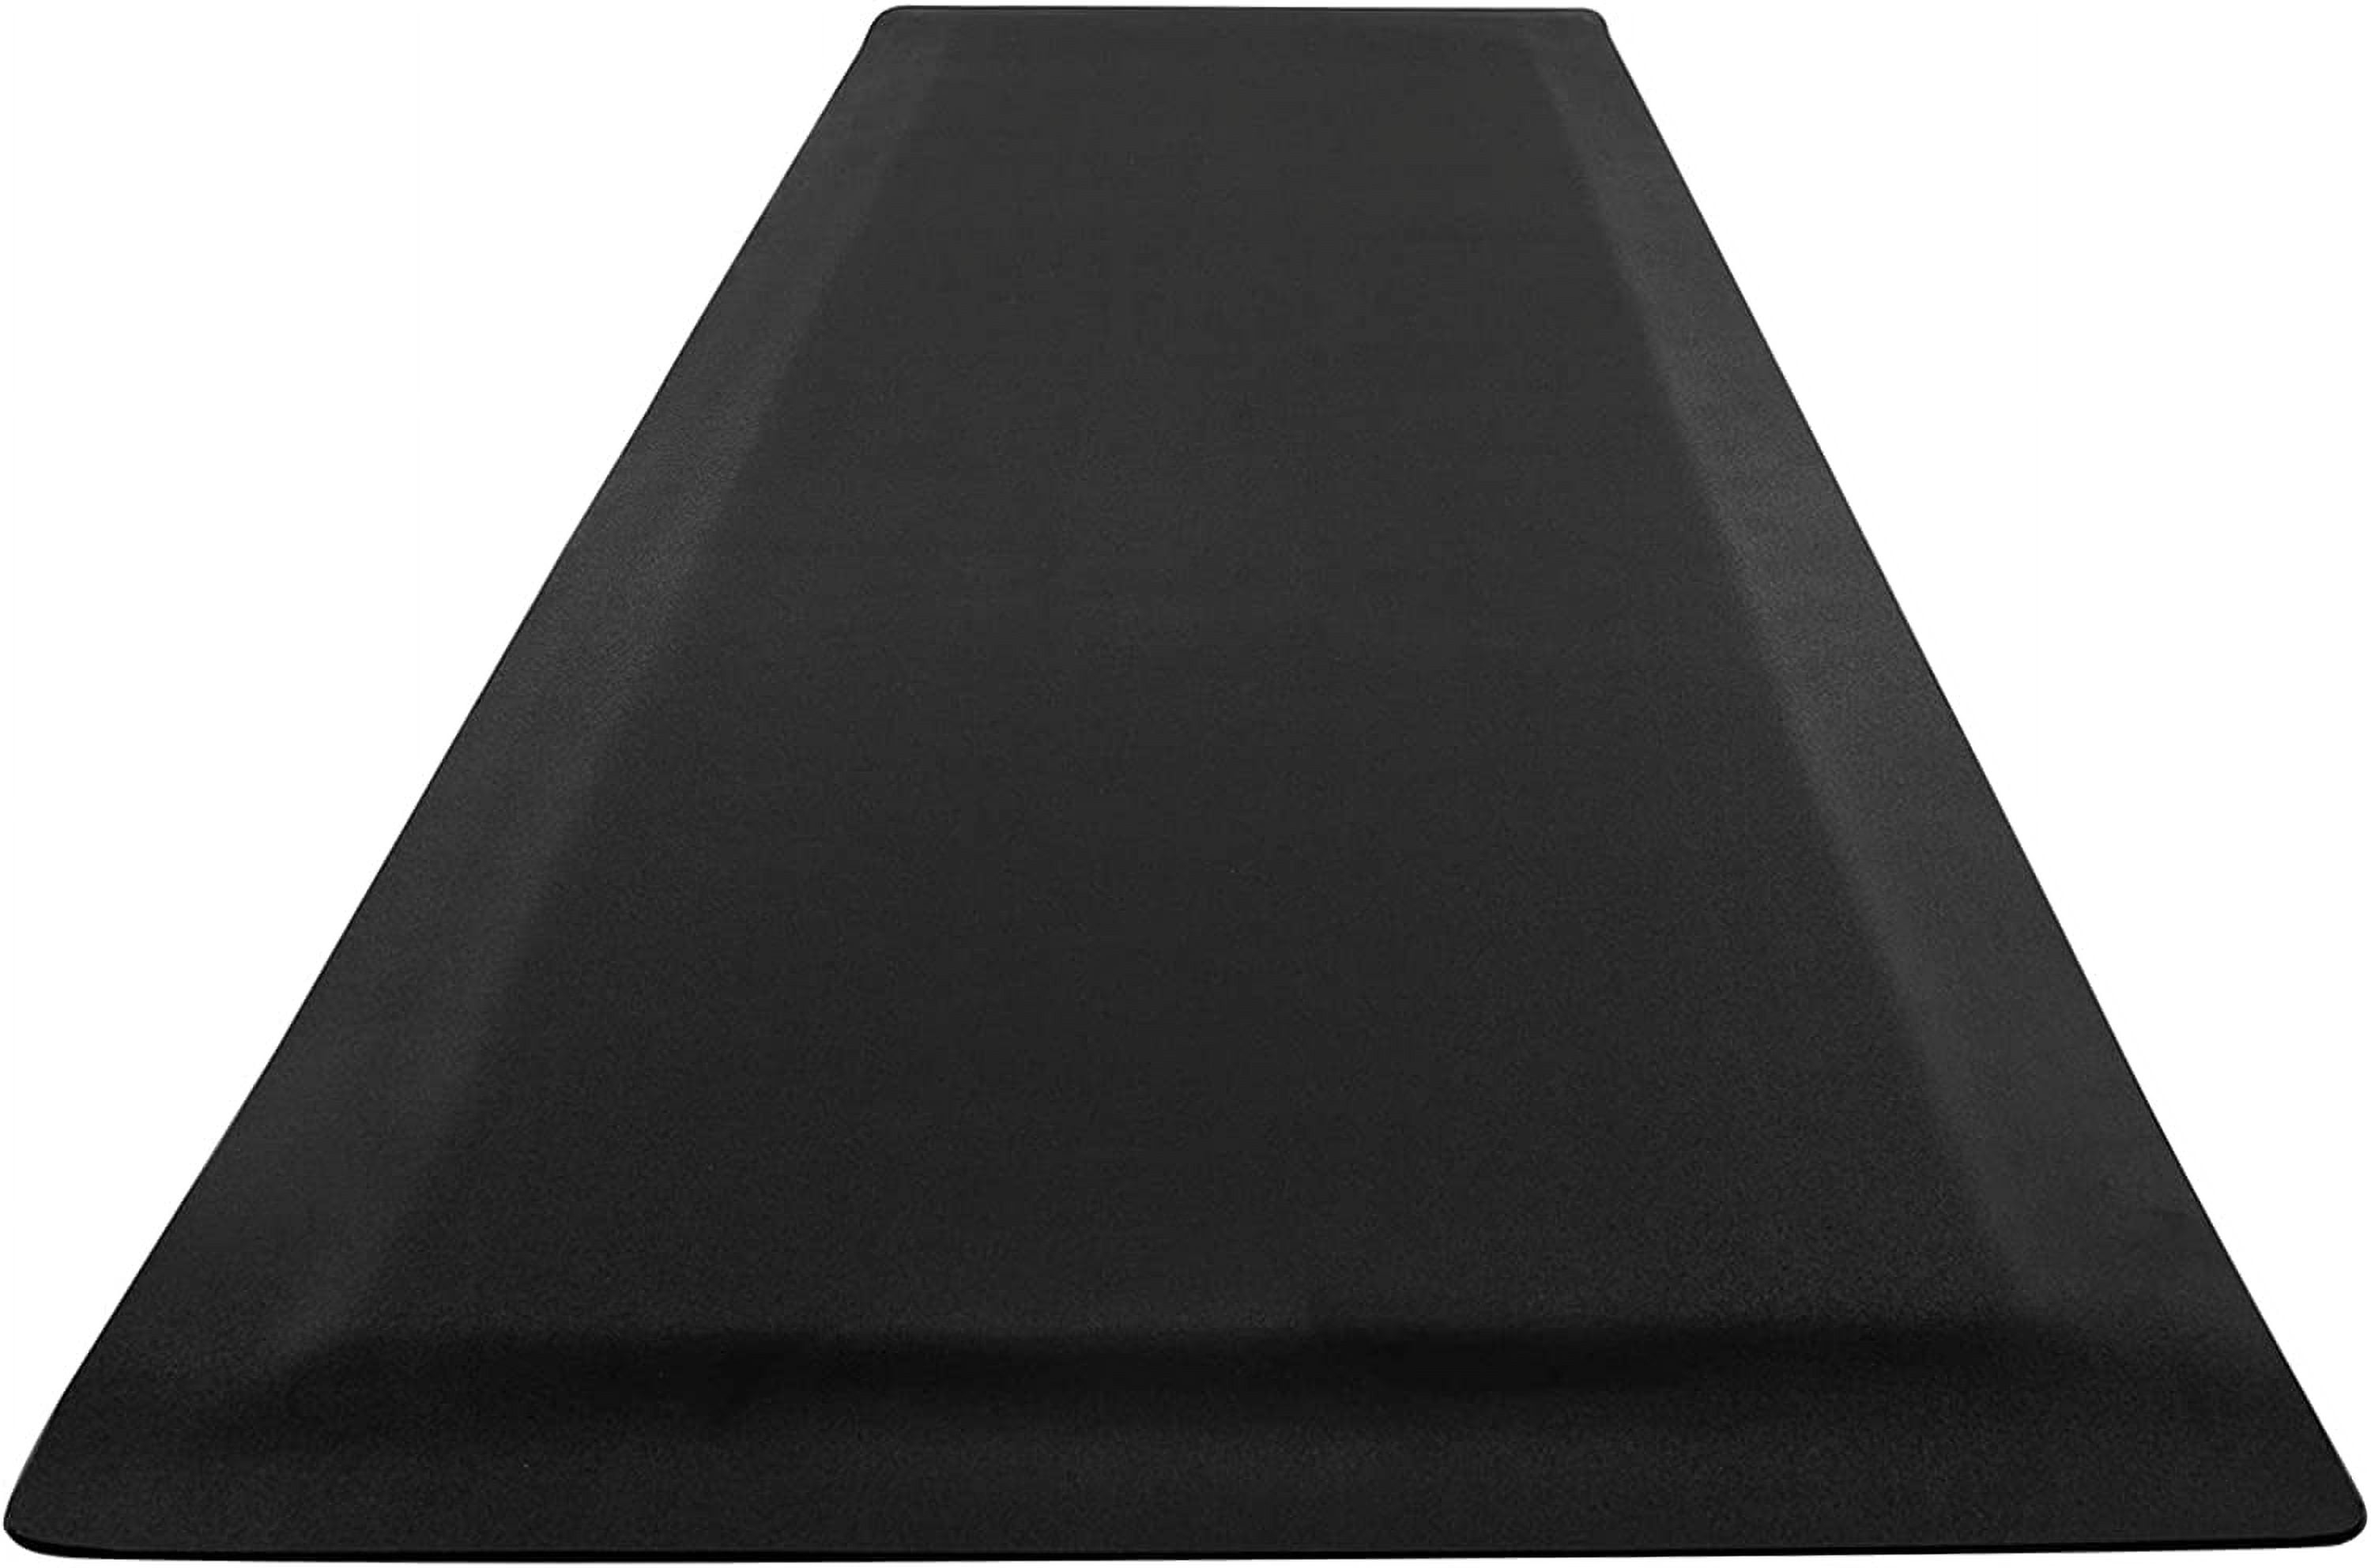 OMECAL 70x24x1/2 Thick Medical Bedside Fall Safety Protection Floor Mat  for Elderly Senior Handicap,Reducing Injury Risk and Impact, Prevent Bed